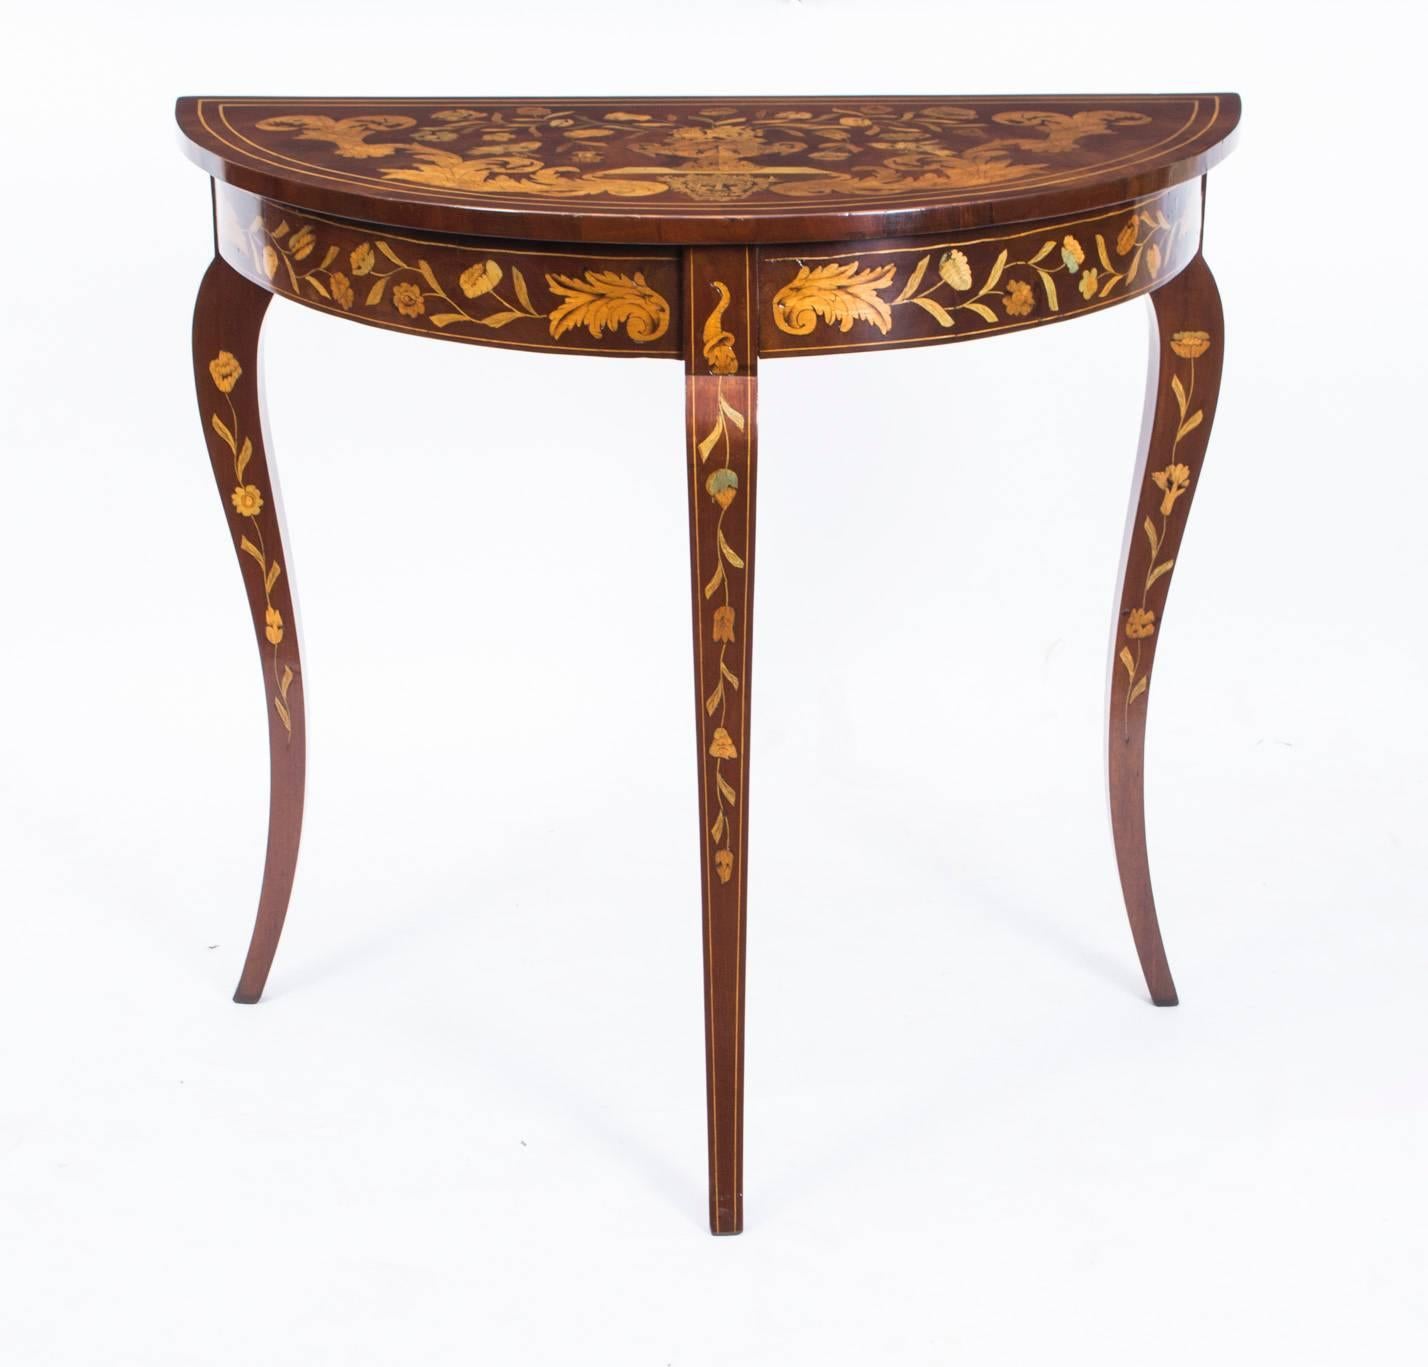 This is a beautifully crafted antique Dutch marquetry console table, circa 1780 in date.
 
This antique console is made from the finest quality walnut with satinwood and boxwood inlaid marquetry, forming a composition of a bouquet of flowers in a